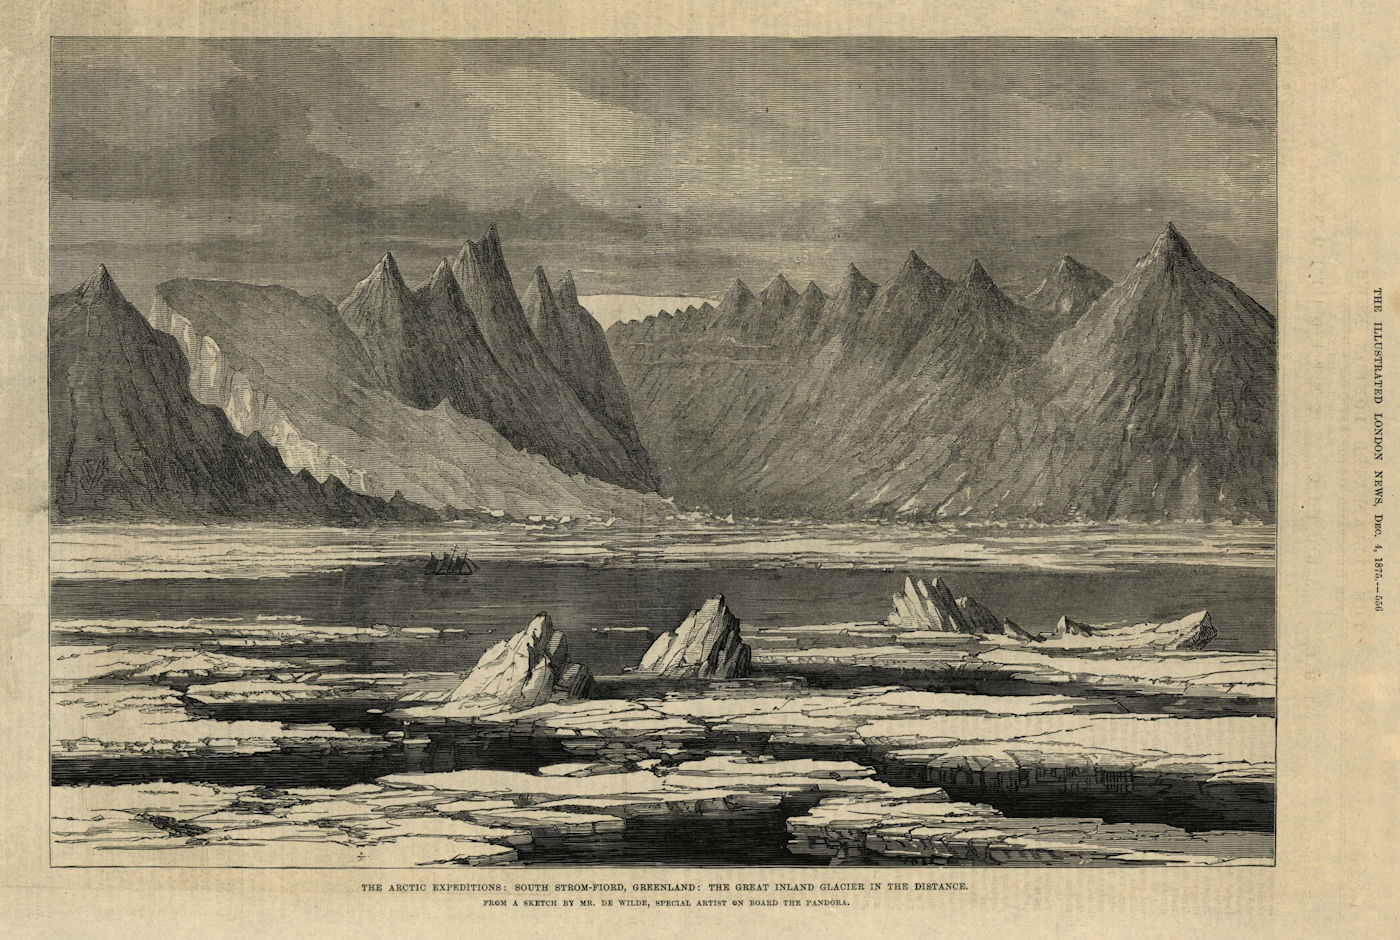 Greenland. South Strom-Fiord & the inland glacier. Arctic 1875 ILN full page